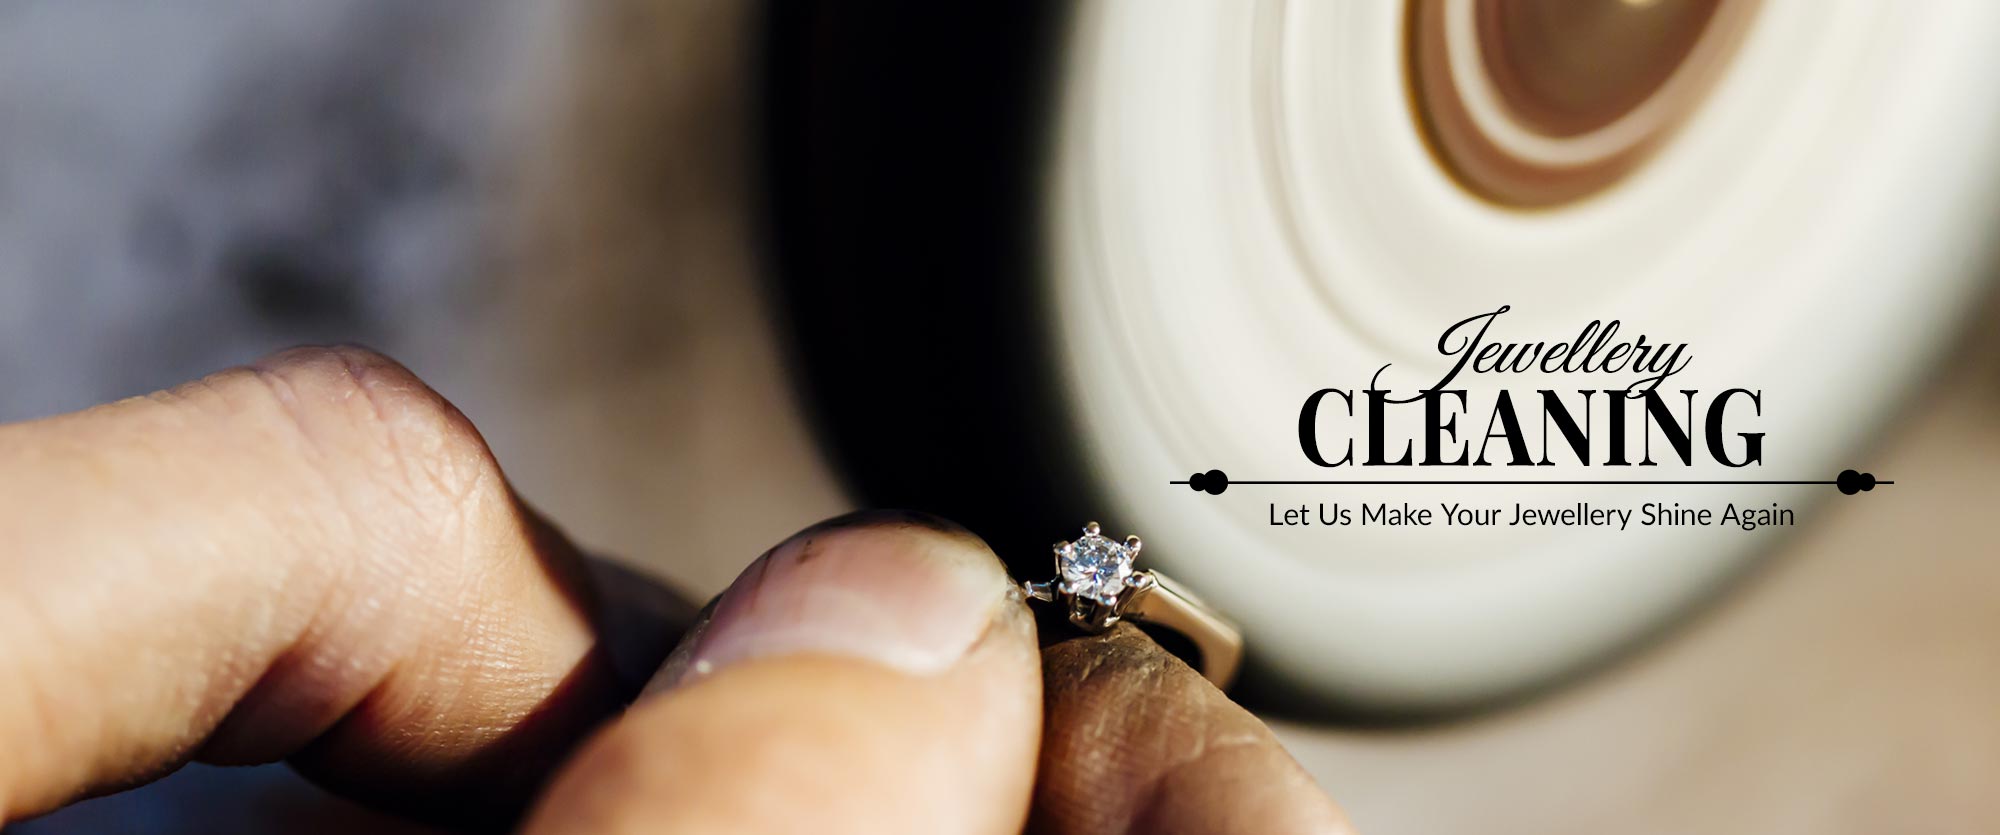 Jewellery Cleaning Service Available In Sale, Victoria